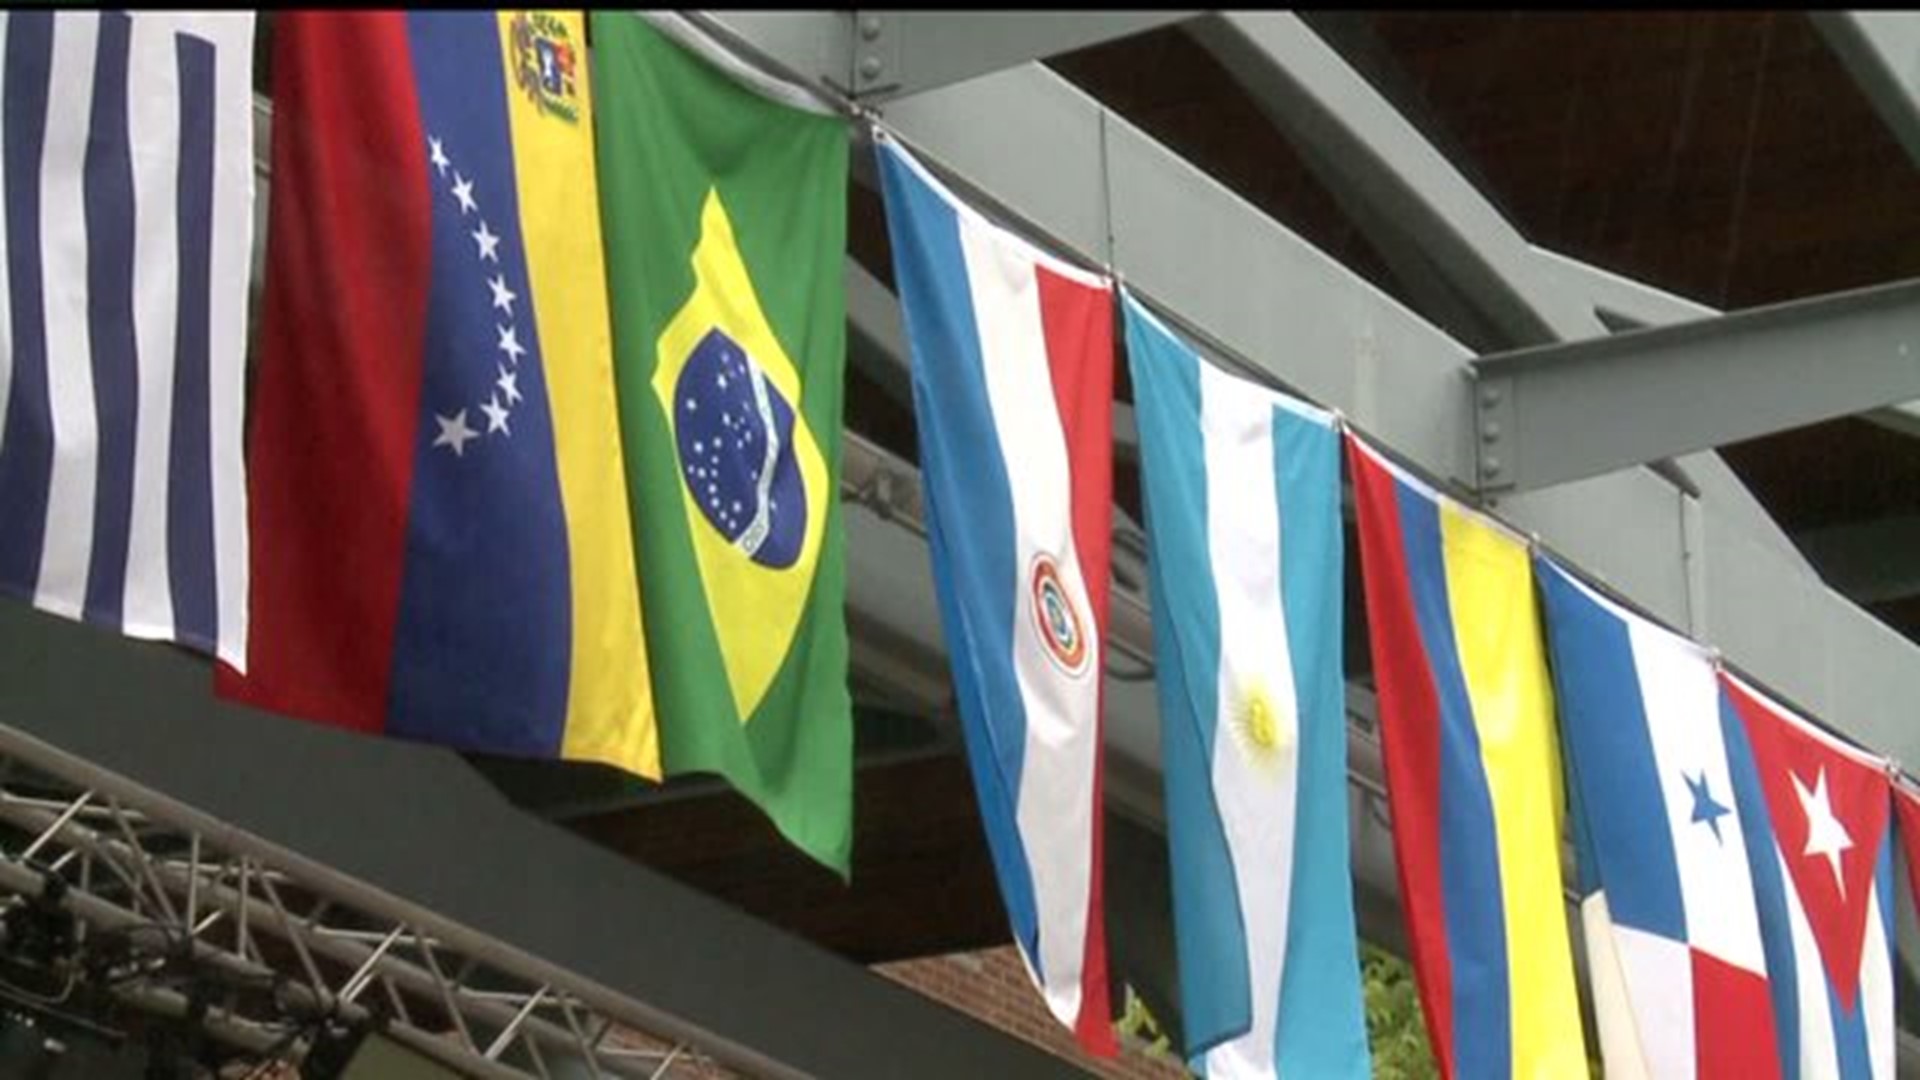 2nd Annual Latin American Festival held in Lancaster